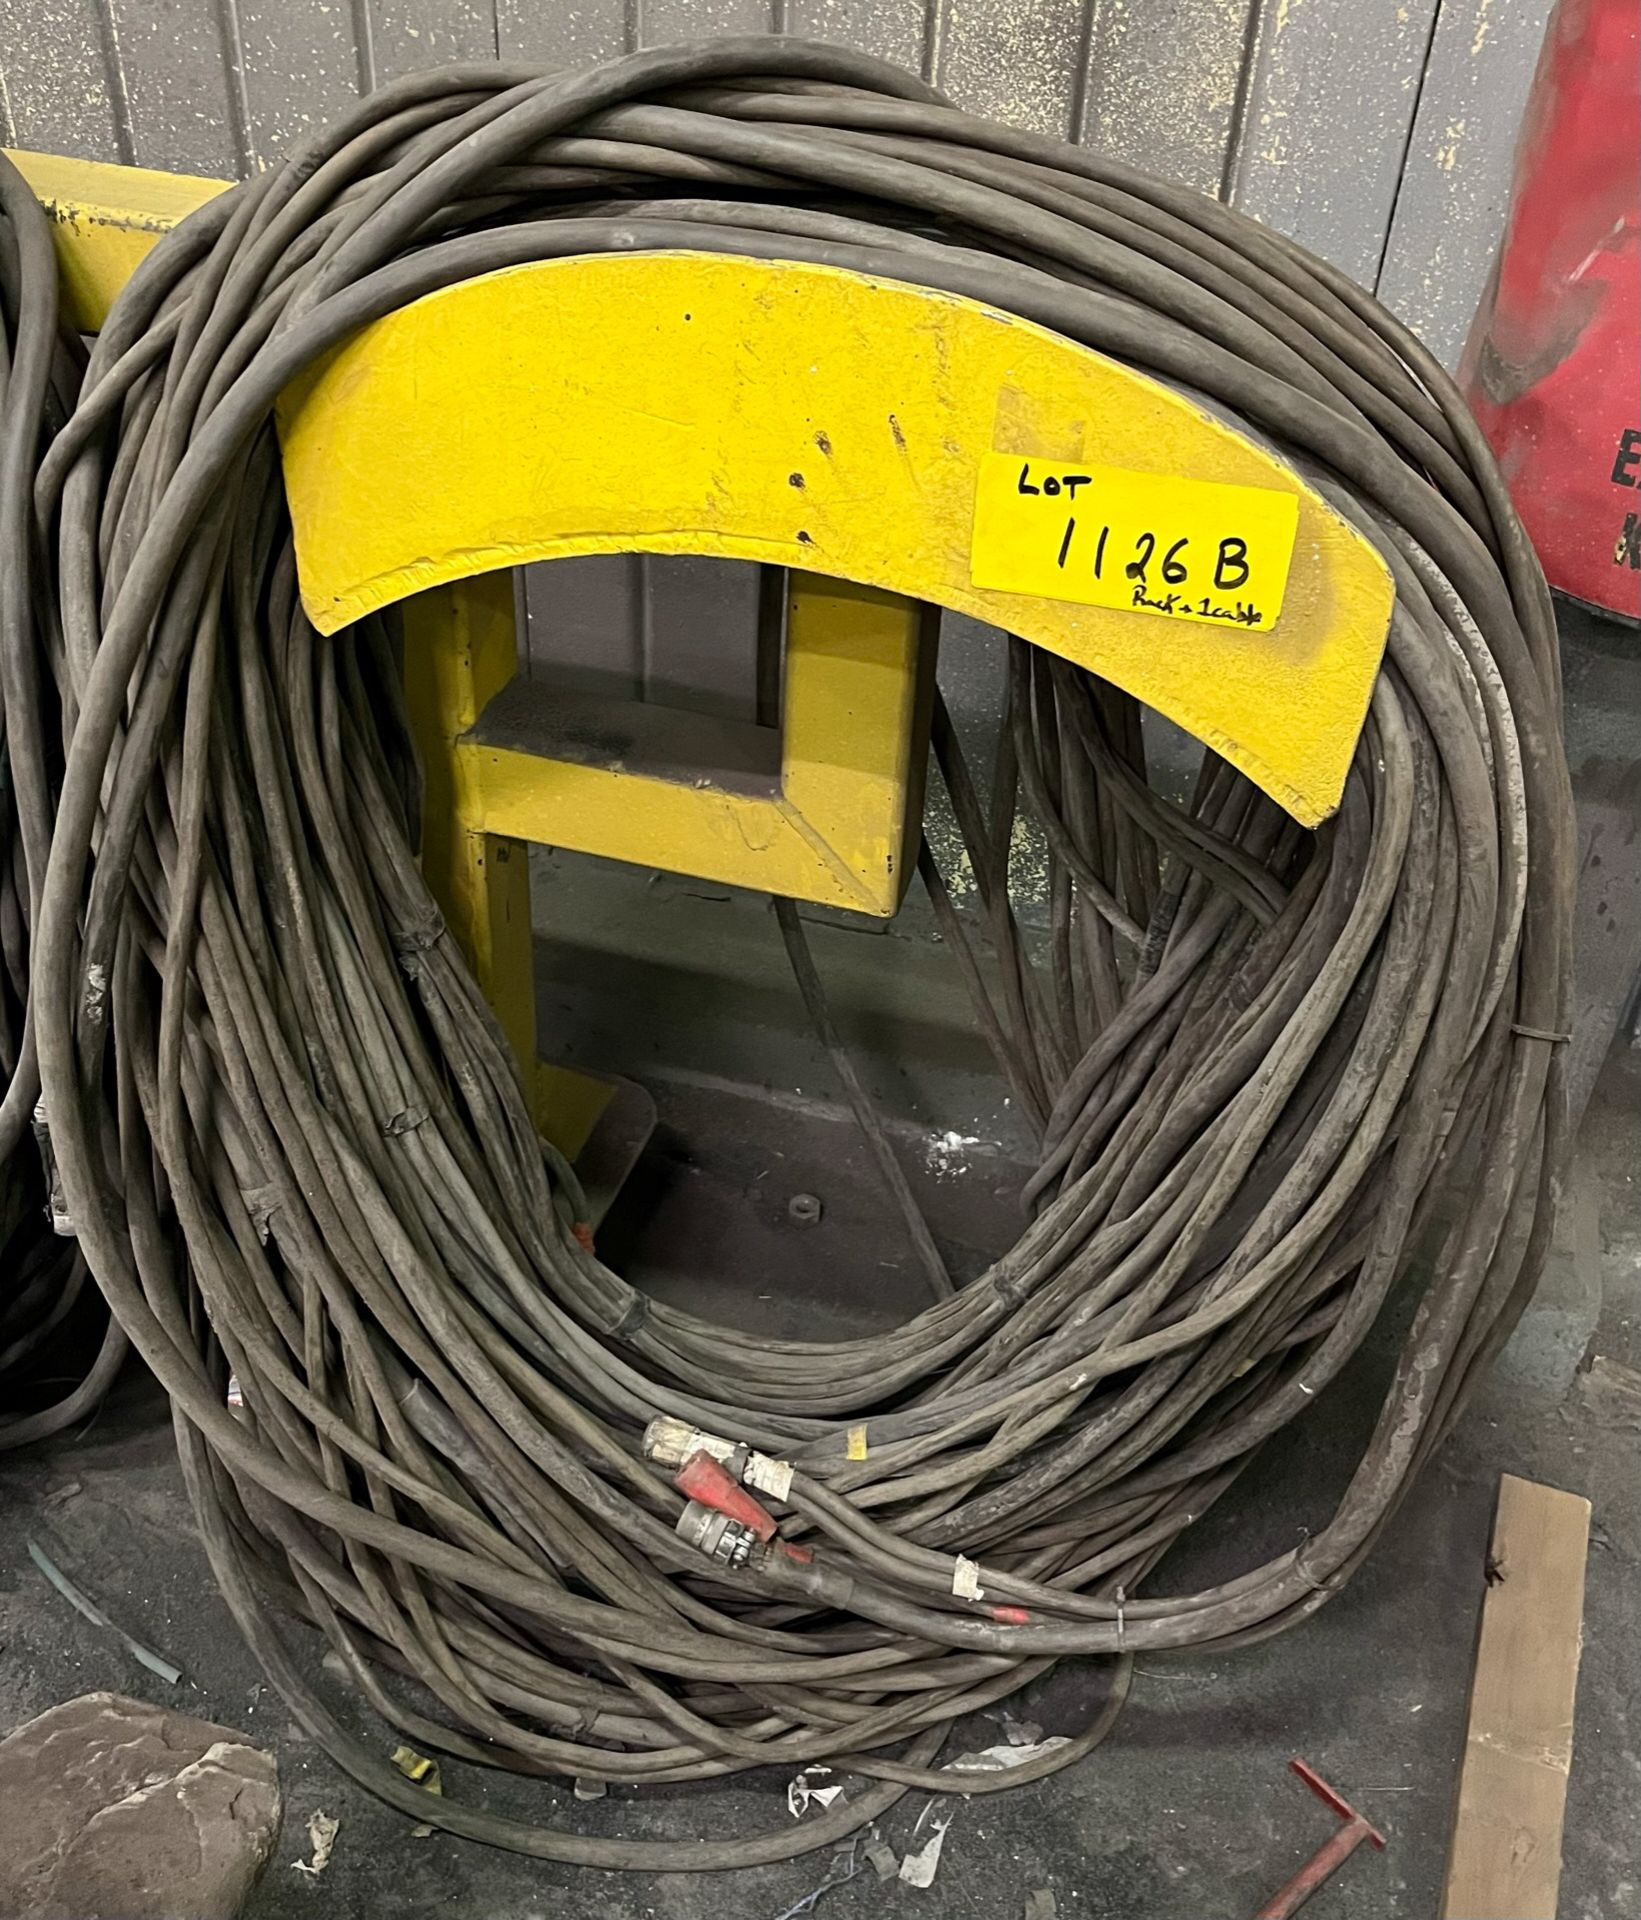 175' METALIZING CABLE SET, (4) 2/0 CABLES, (1) CONTROL CABLE WITH RACK [RIGGING FEES FOR LOT #